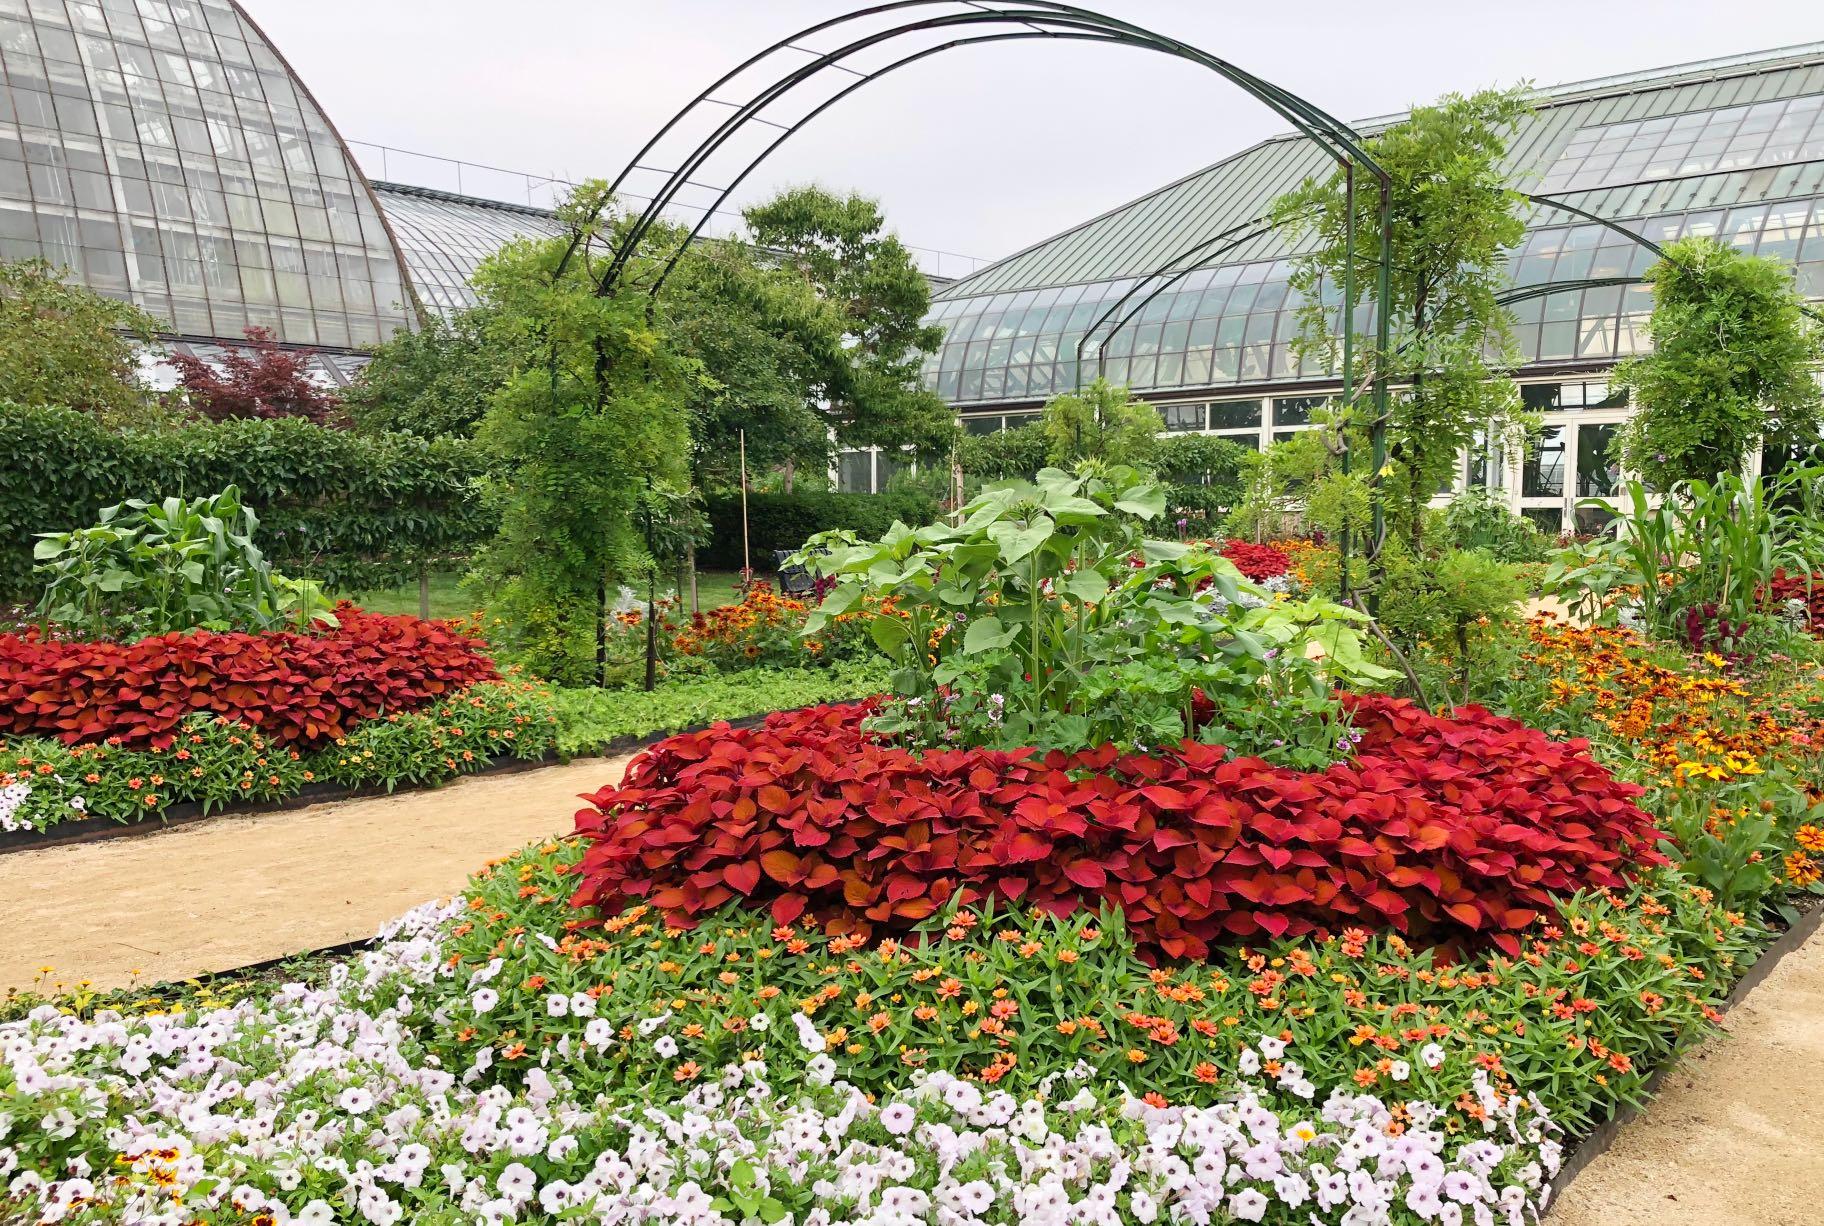 Among the exhibit's focal points are groupings "framed" by circles of red coleus. (Patty Wetli / WTTW News)